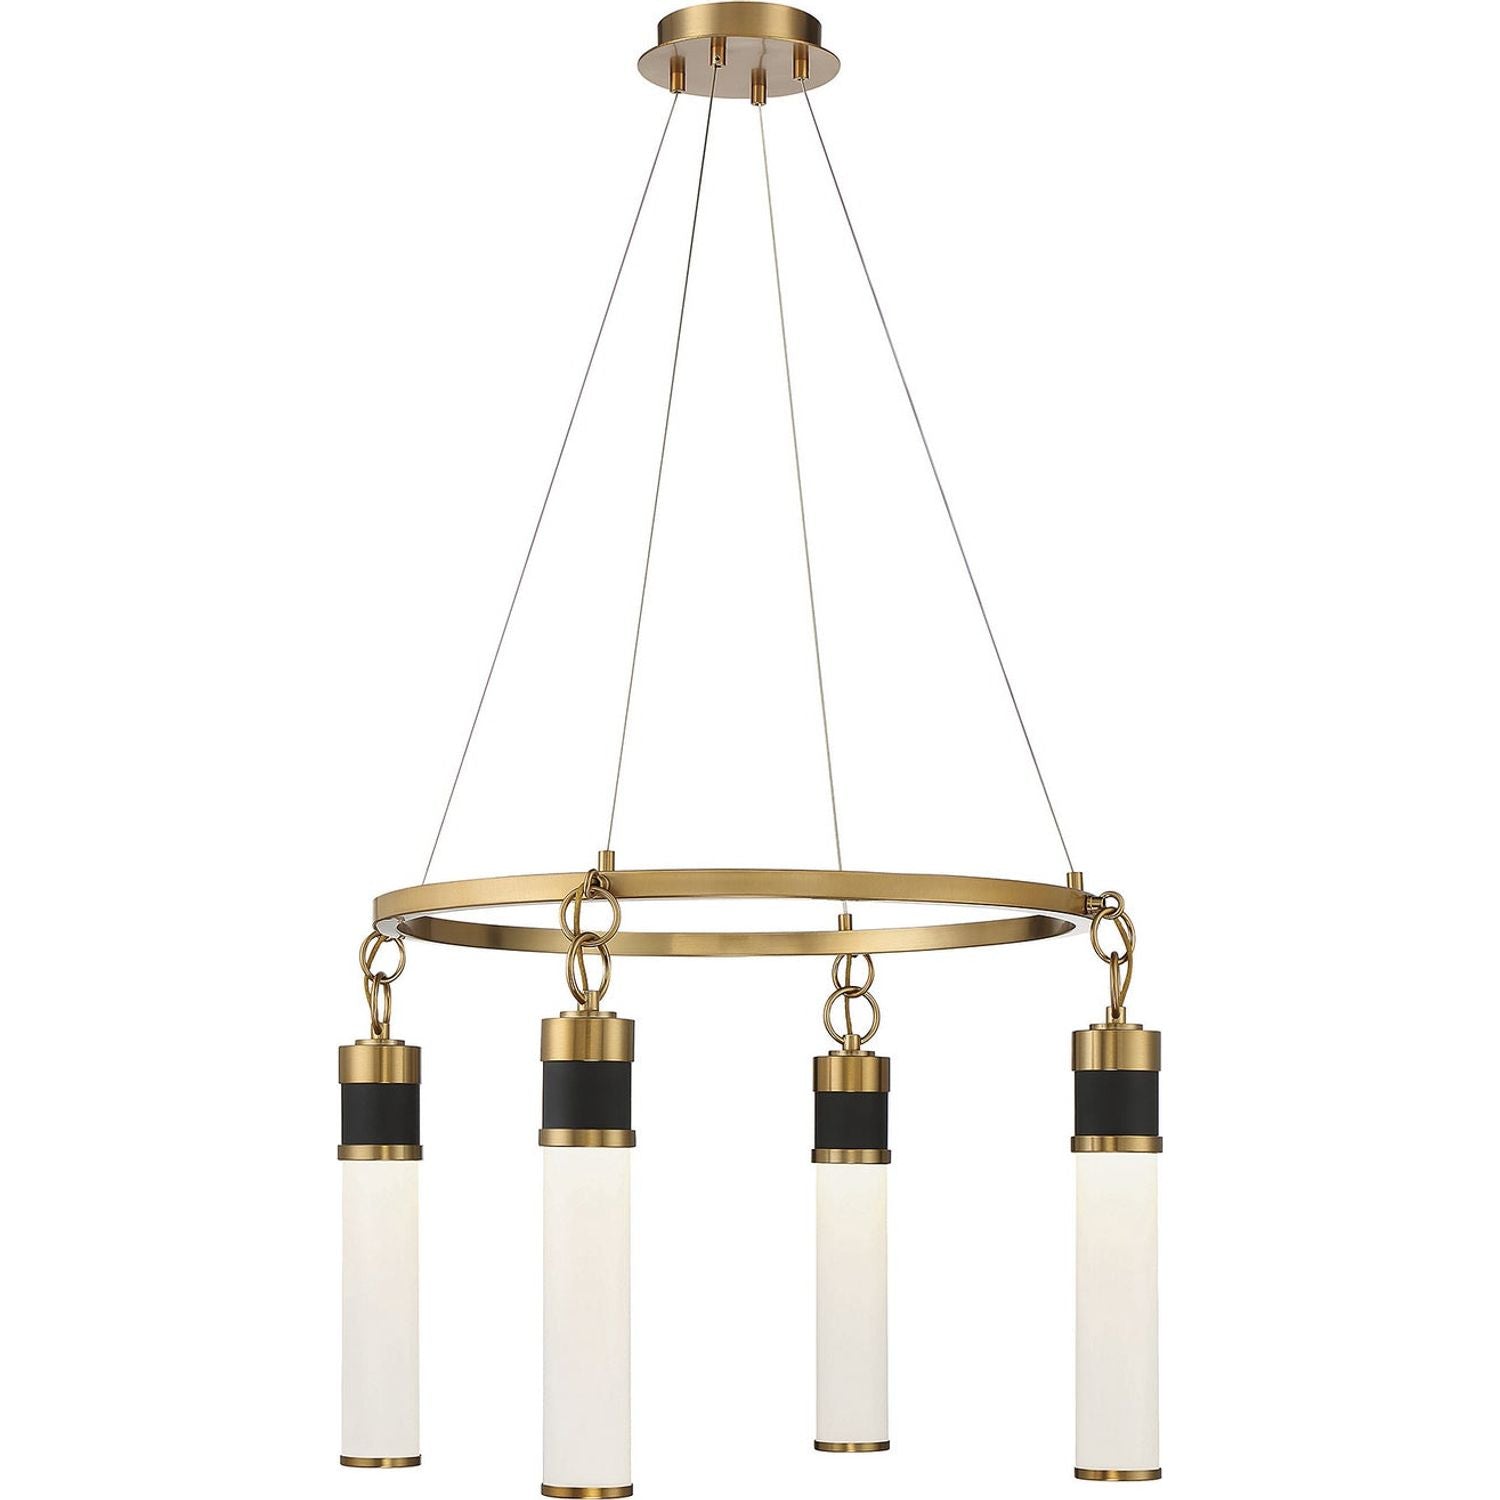 Savoy House - 1-1641-4-143 - LED Chandelier - Abel - Matte Black with Warm Brass Accents